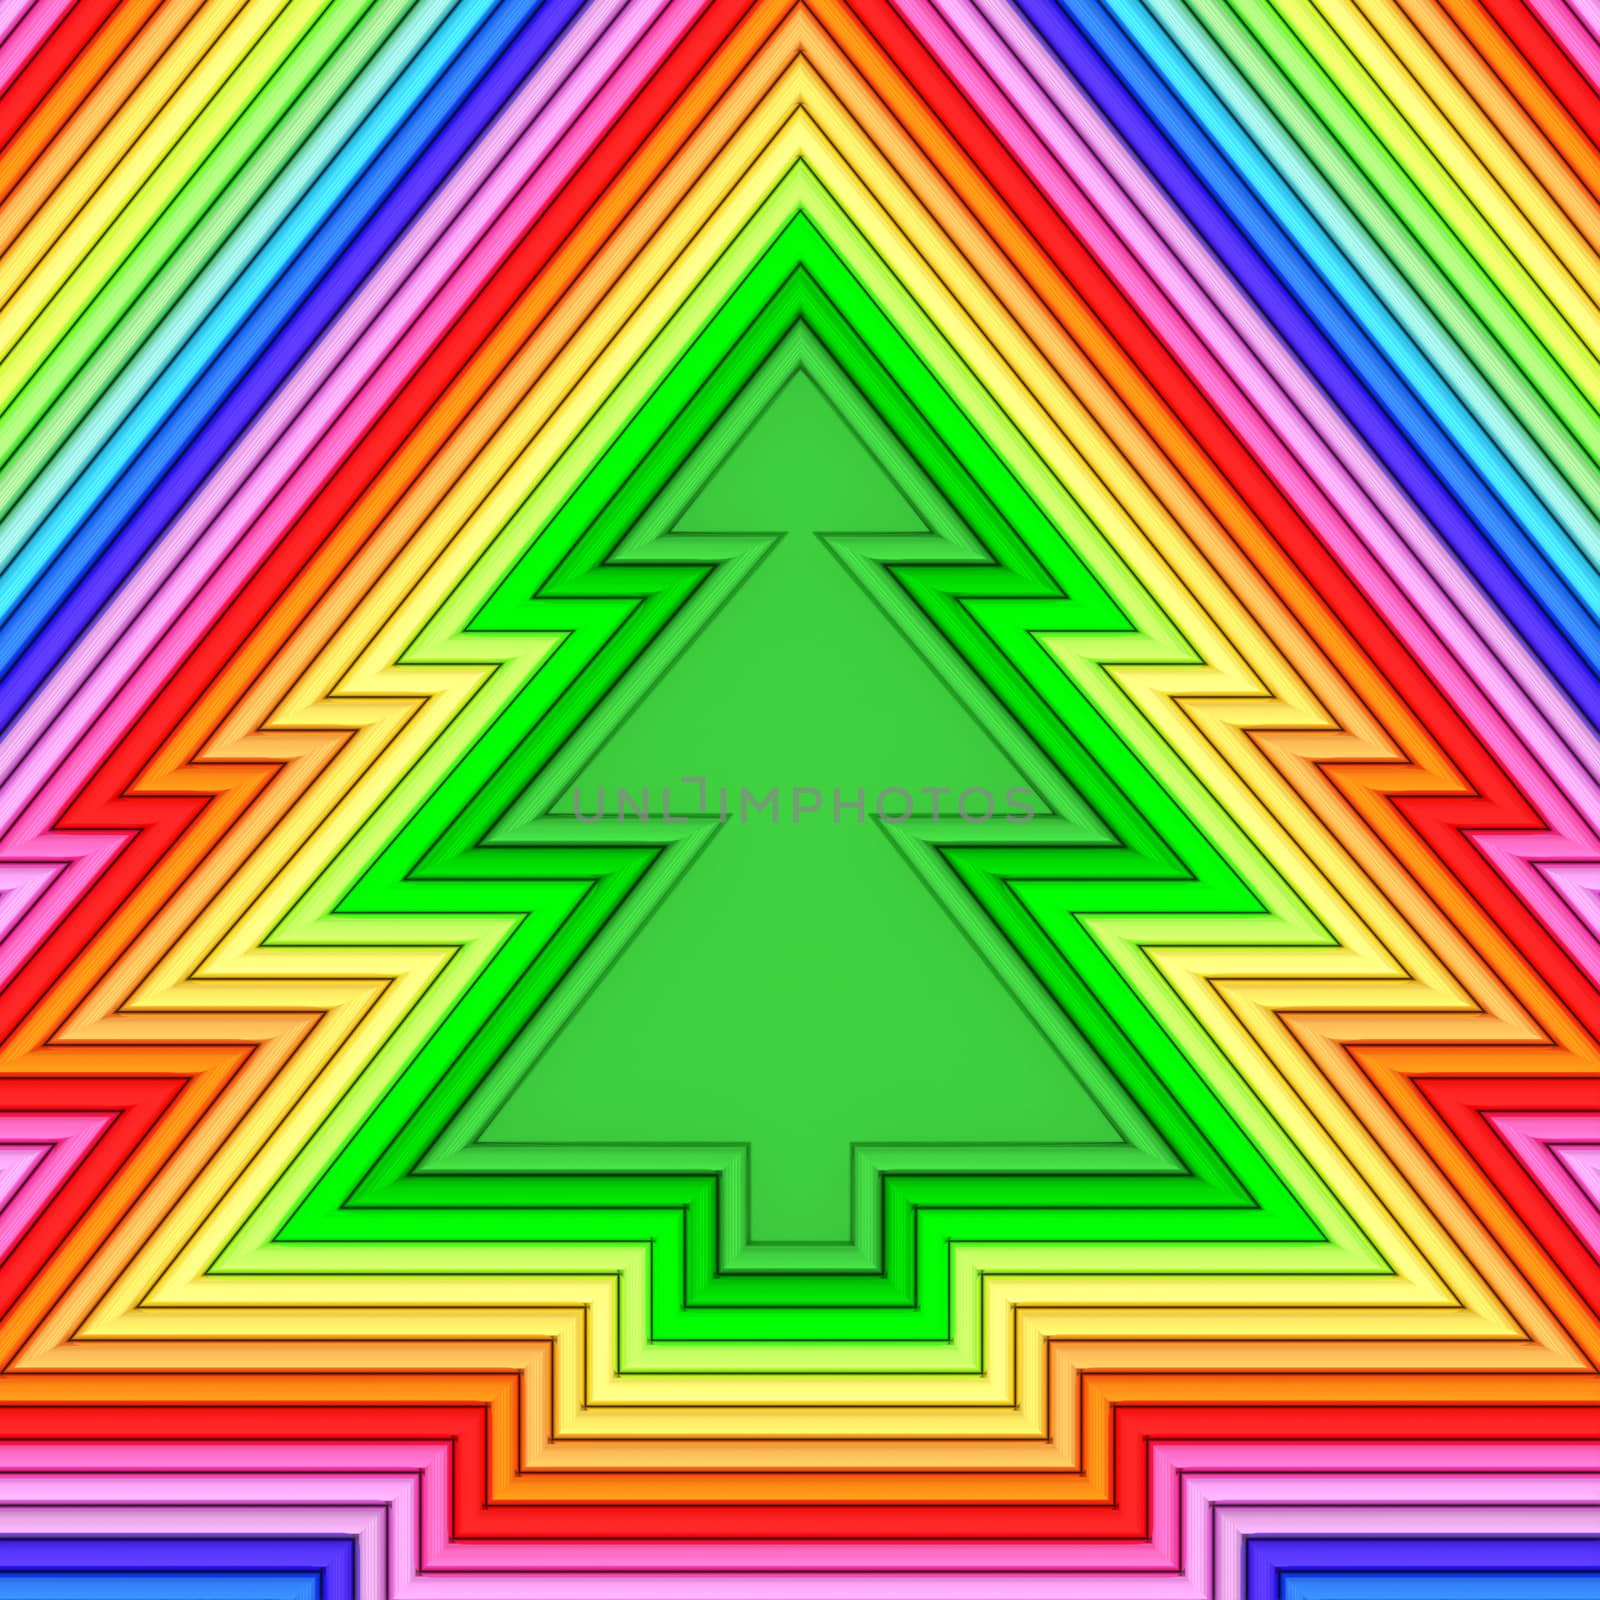 Christmas tree shape composed of colorful metallic pipes. High resolution 3D image